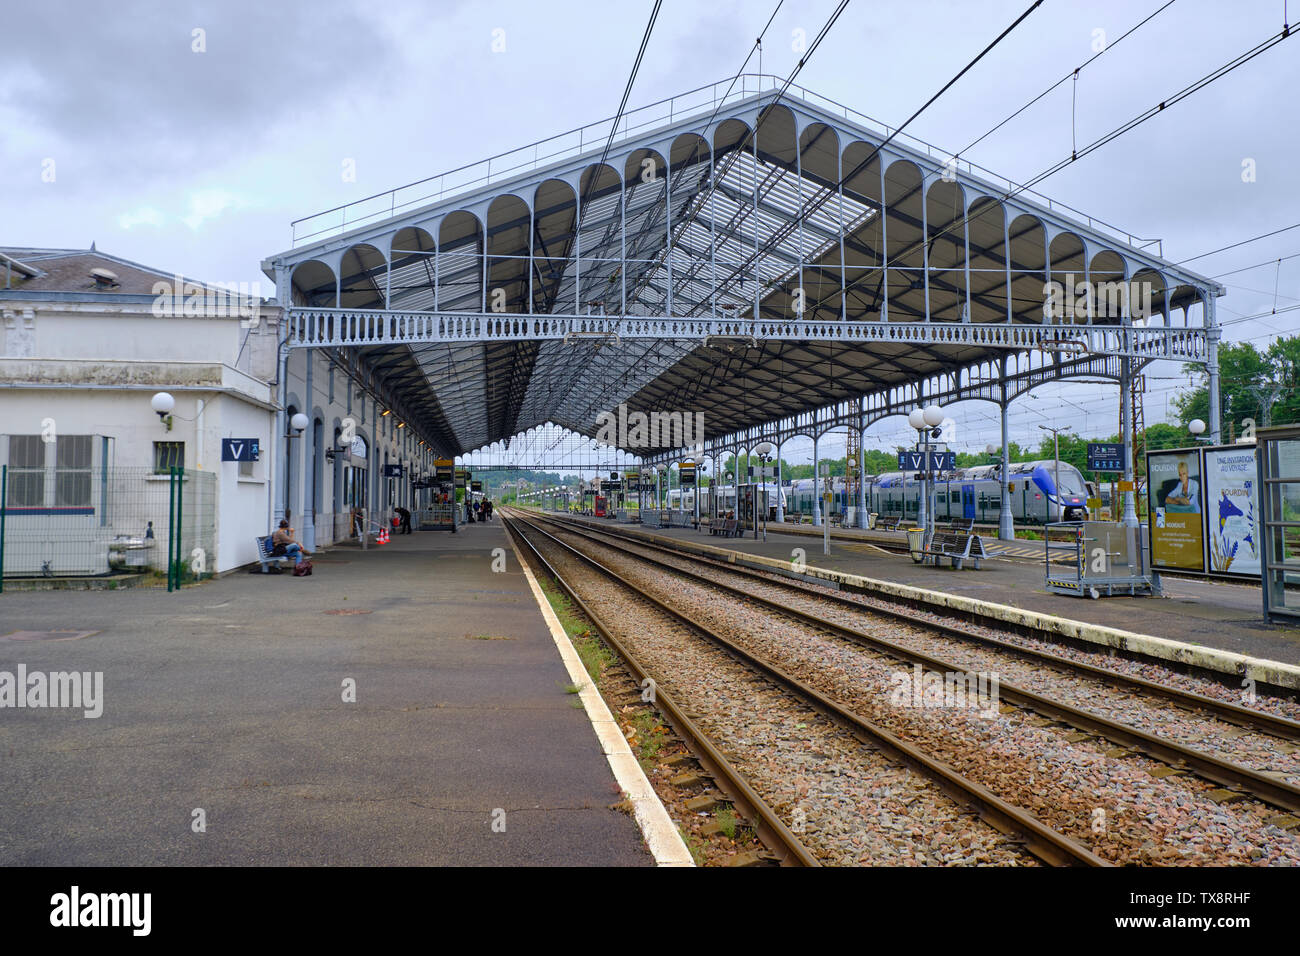 The old style Pau Station.  Metal frame covering the Platforms and tracks and electrical wires above. Pau, France, June 8, 2019 Stock Photo